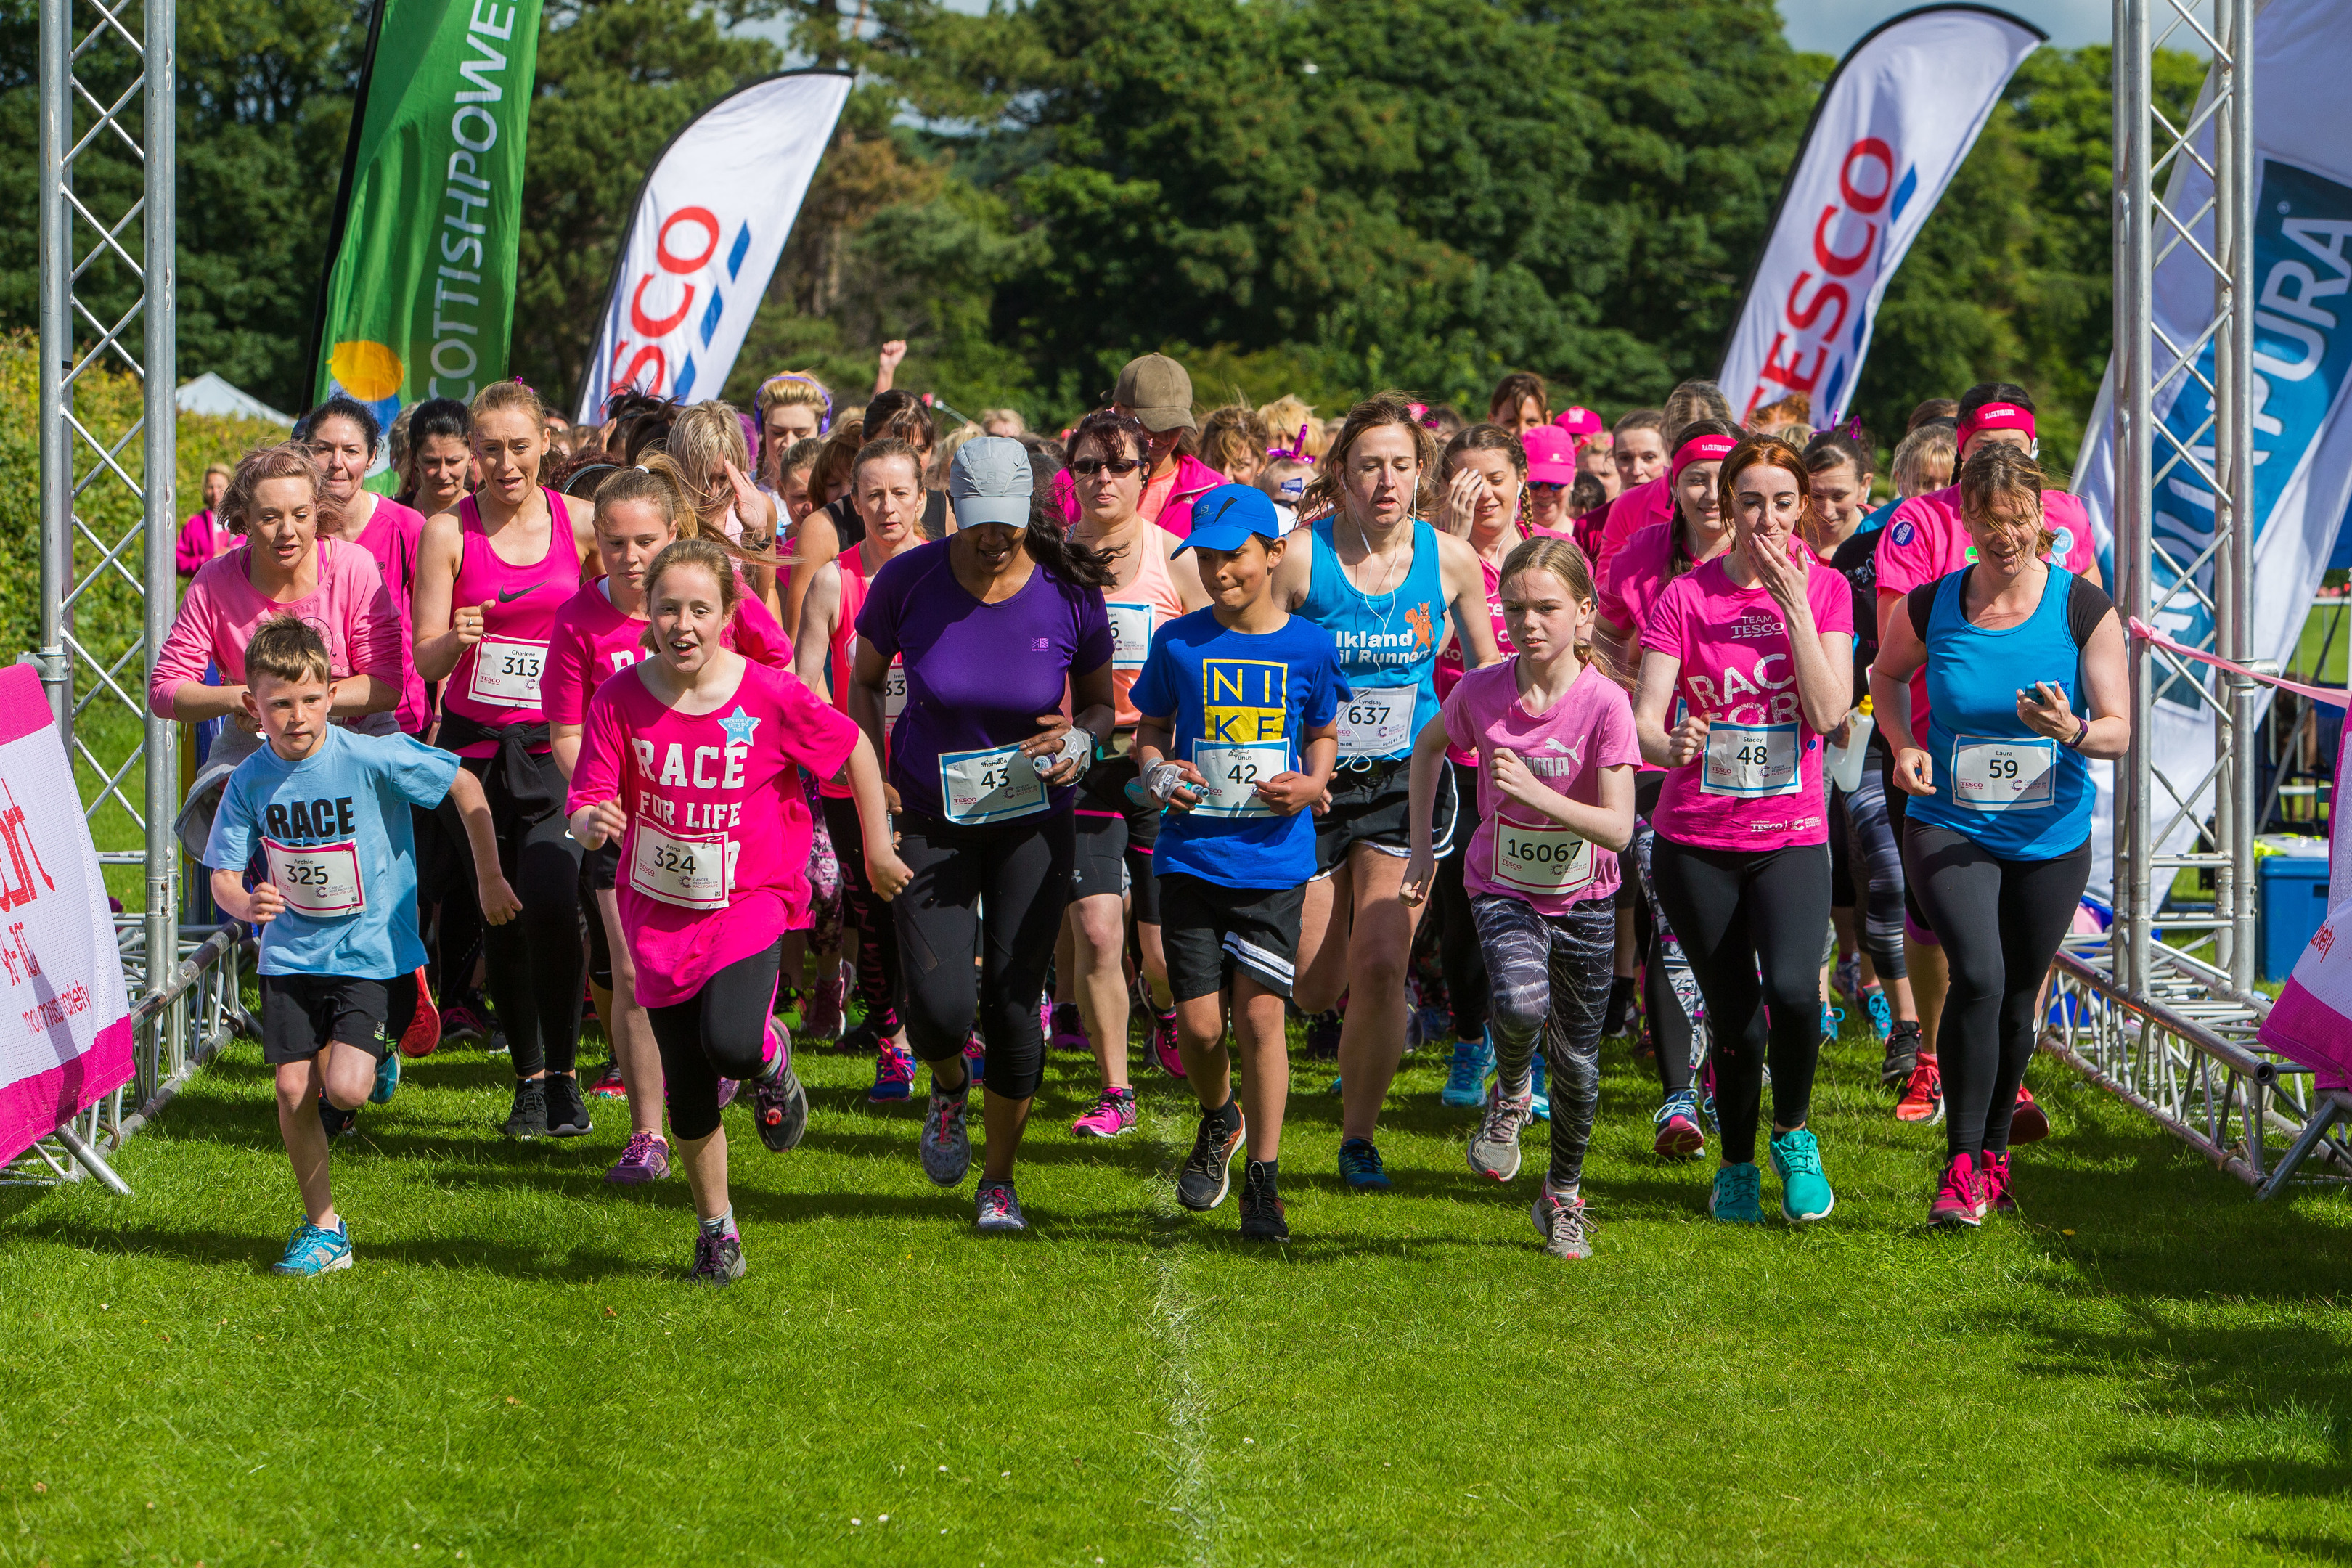 Race For Life in Kirkcaldy gets off to a great start at Beveridge Park.